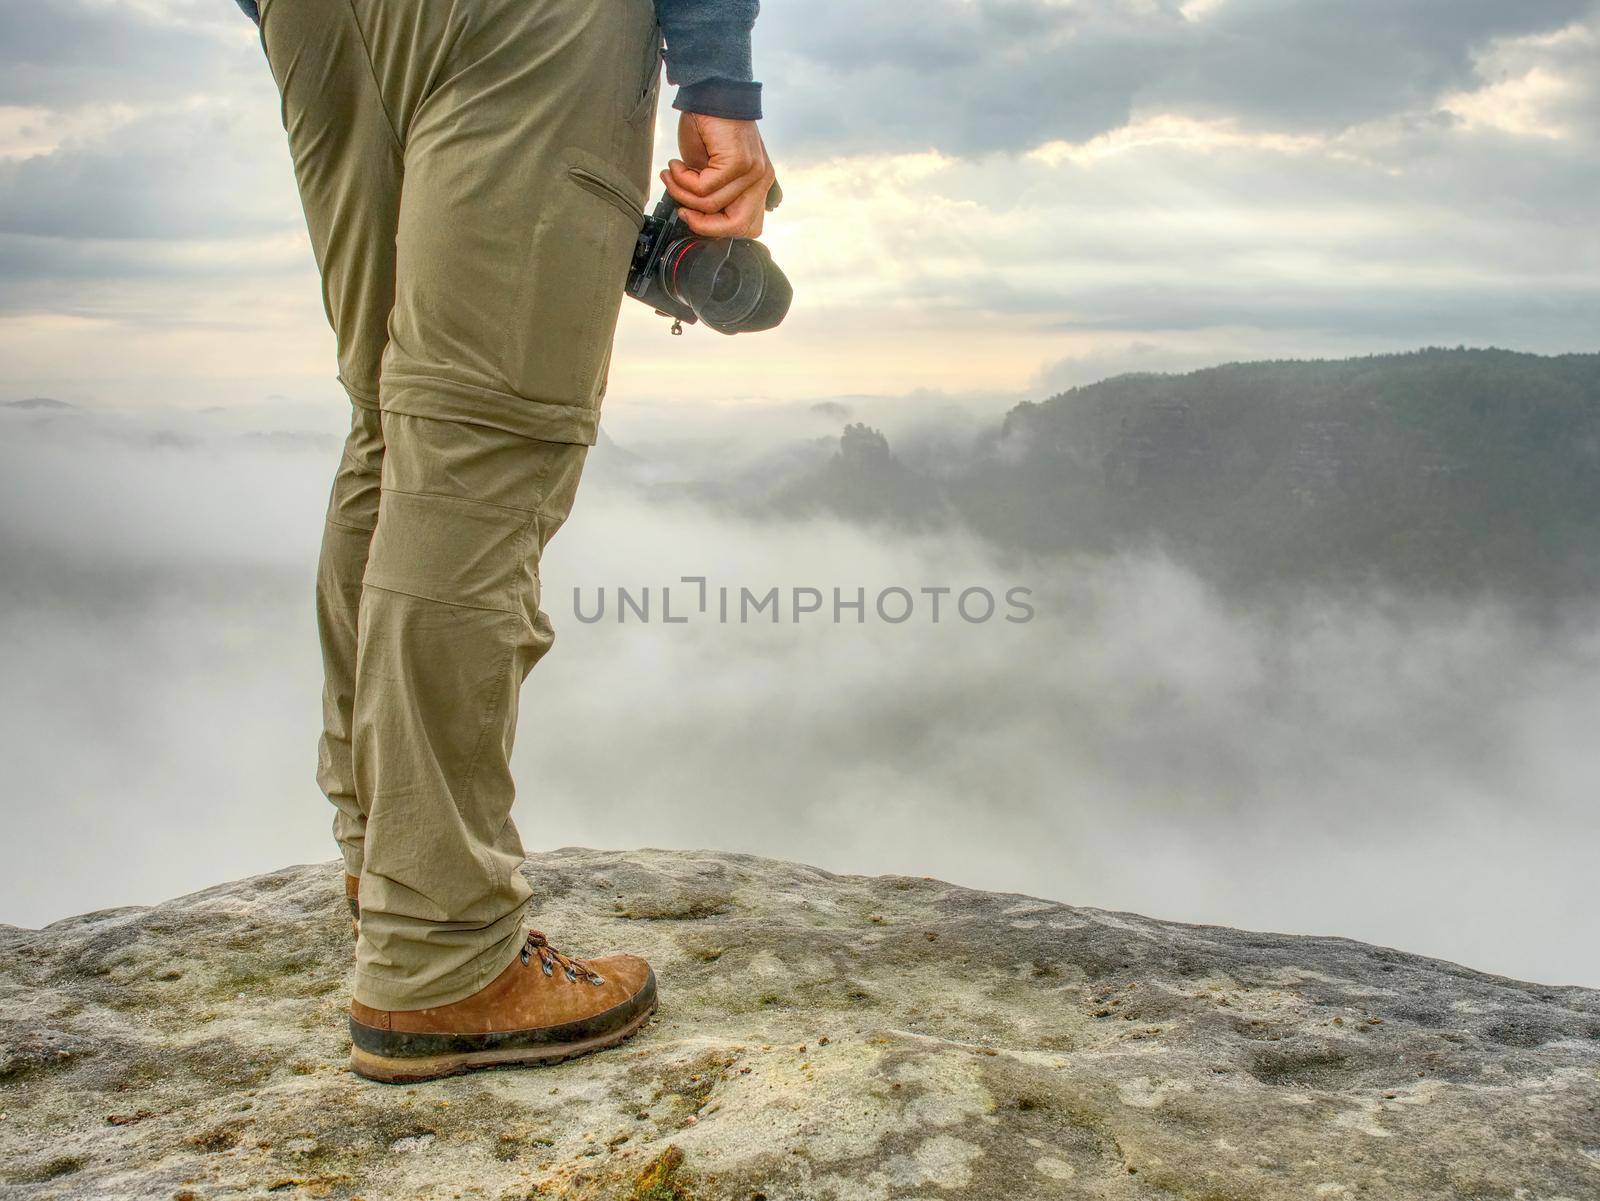 Landscape photograper with camera ready in hand. Man climbed up by rdonar2